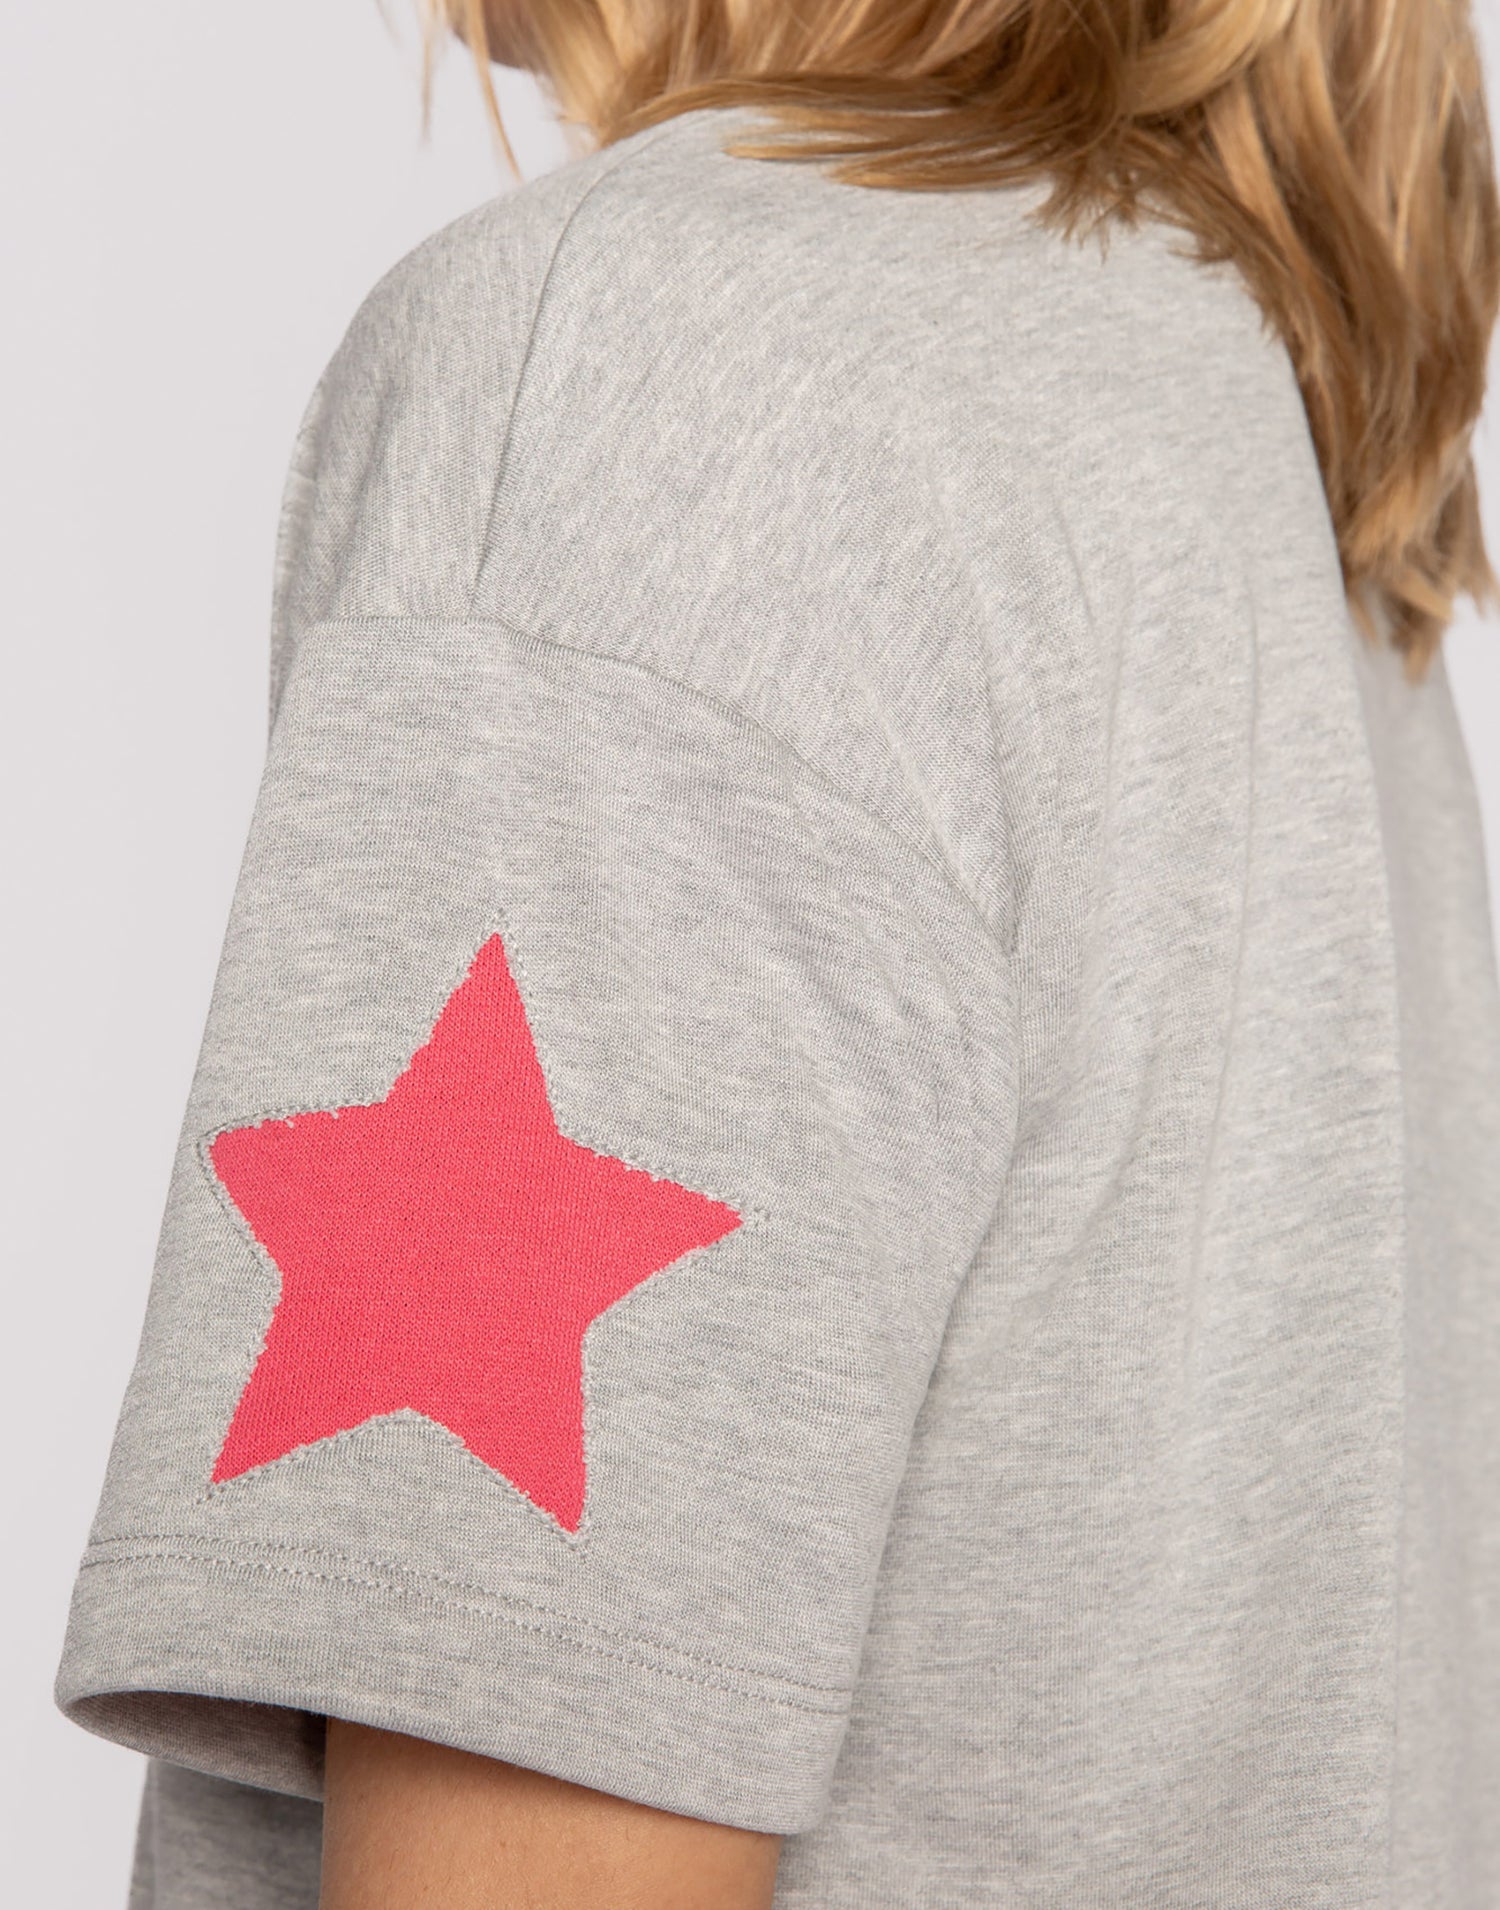 Star Spangled Tee by P.J. Salvage in Heather Grey - Side Detail View